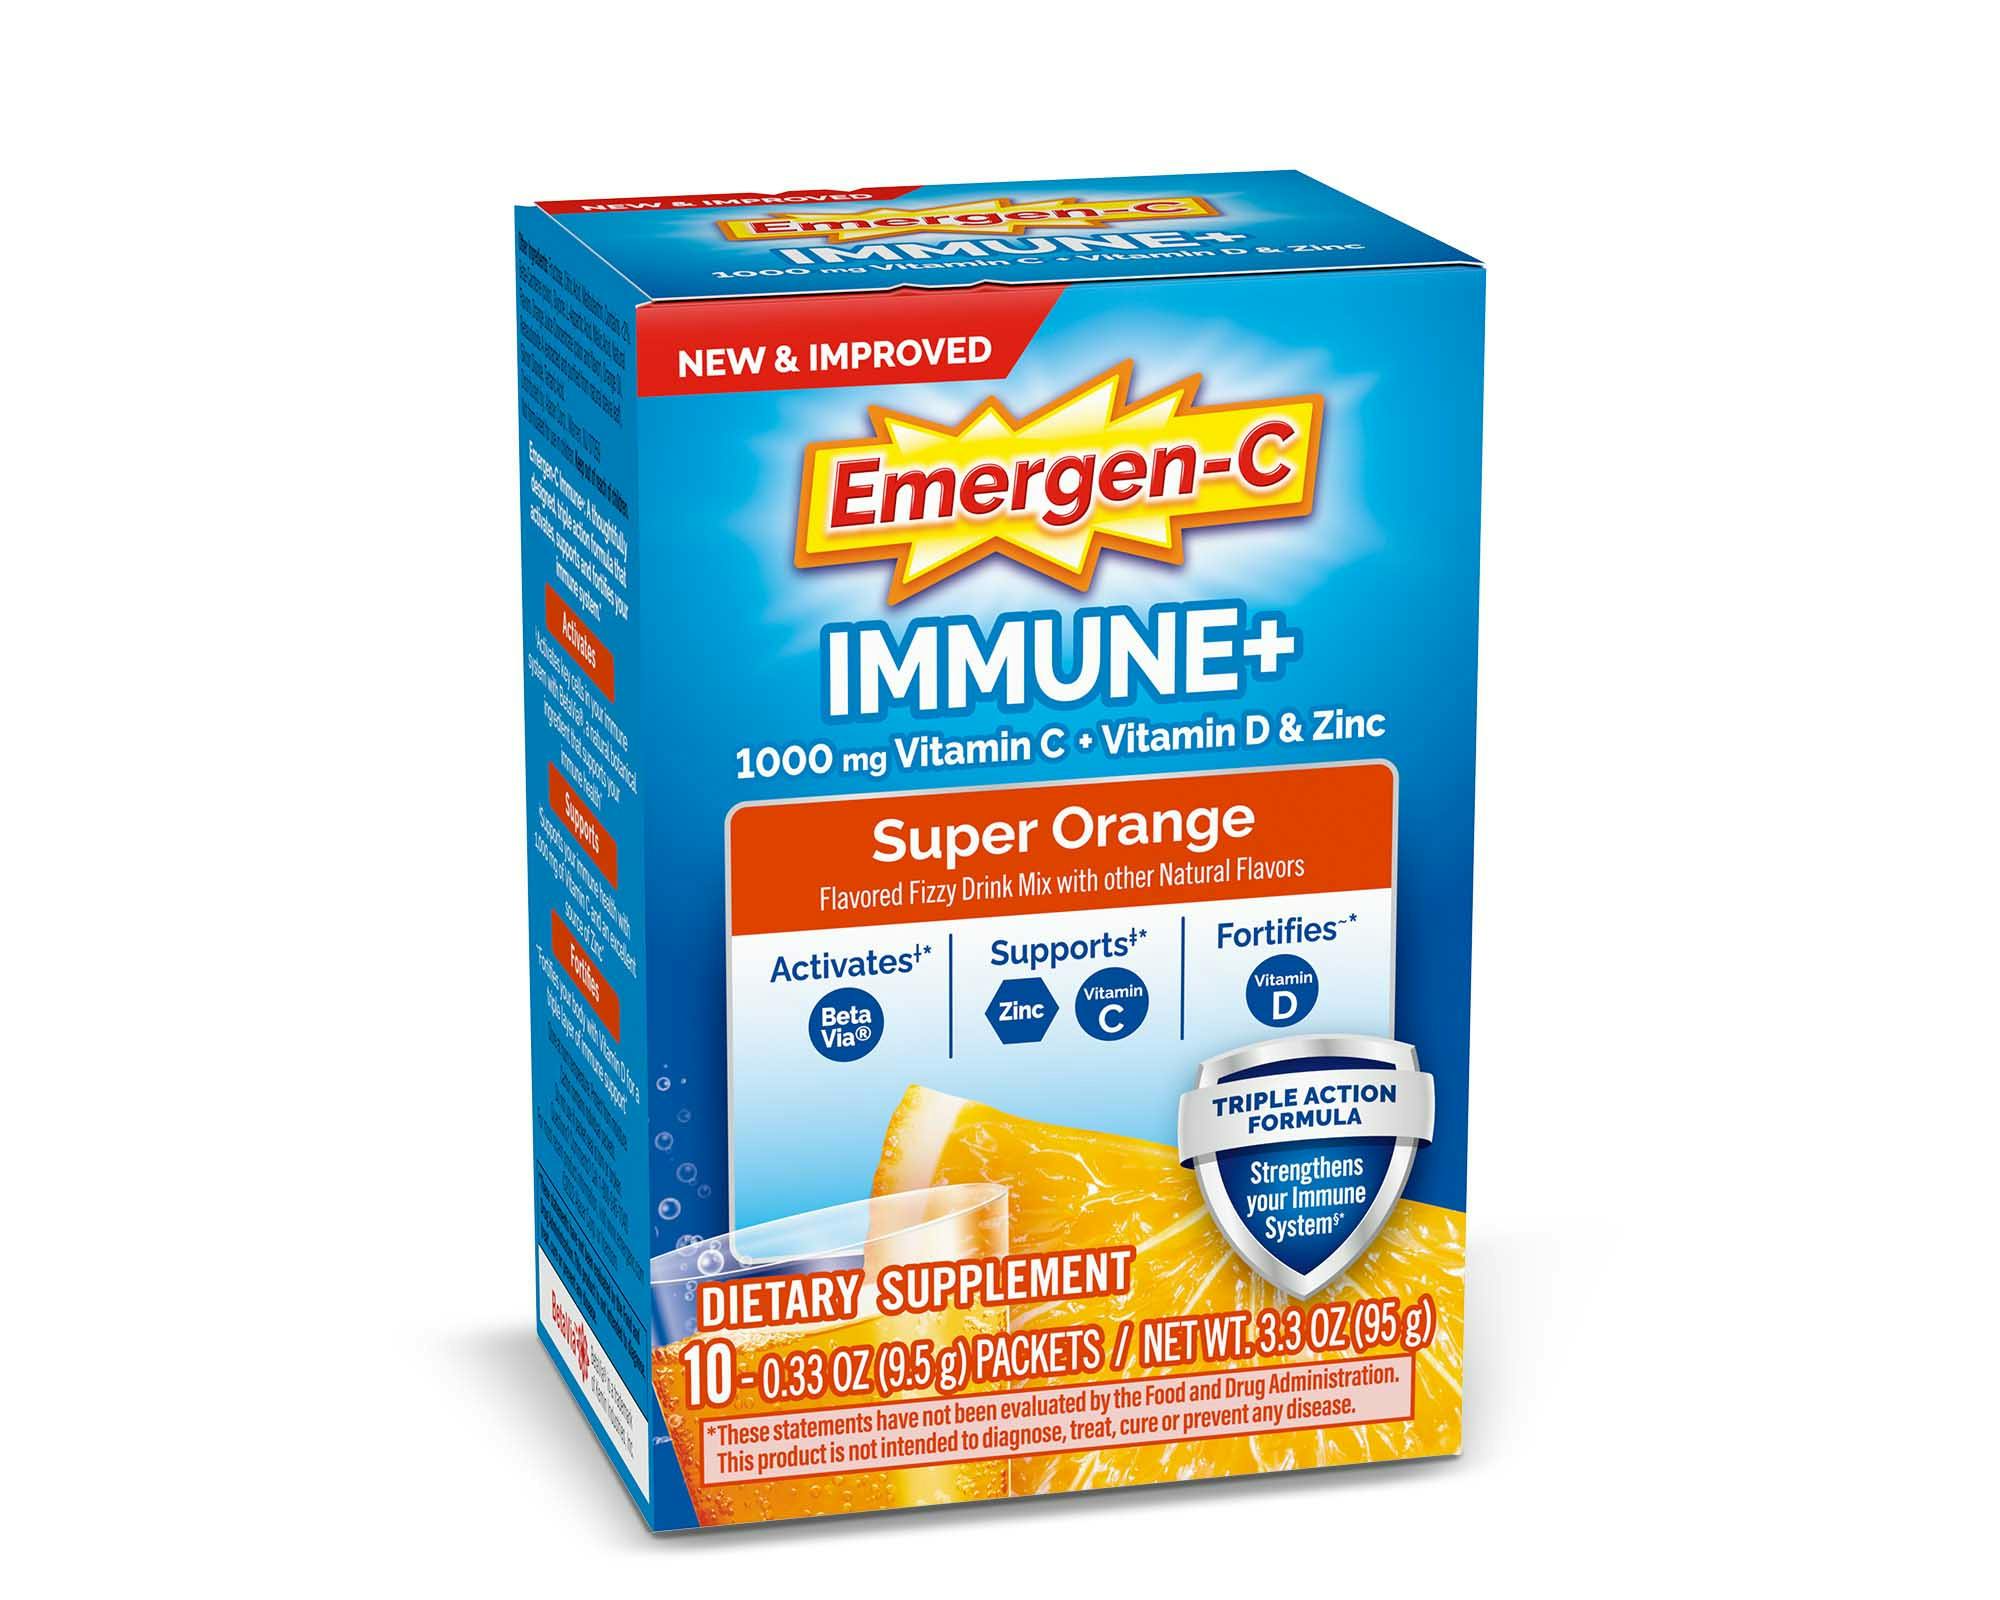 Angled view of Immune+ Super Orange with Triple Action product